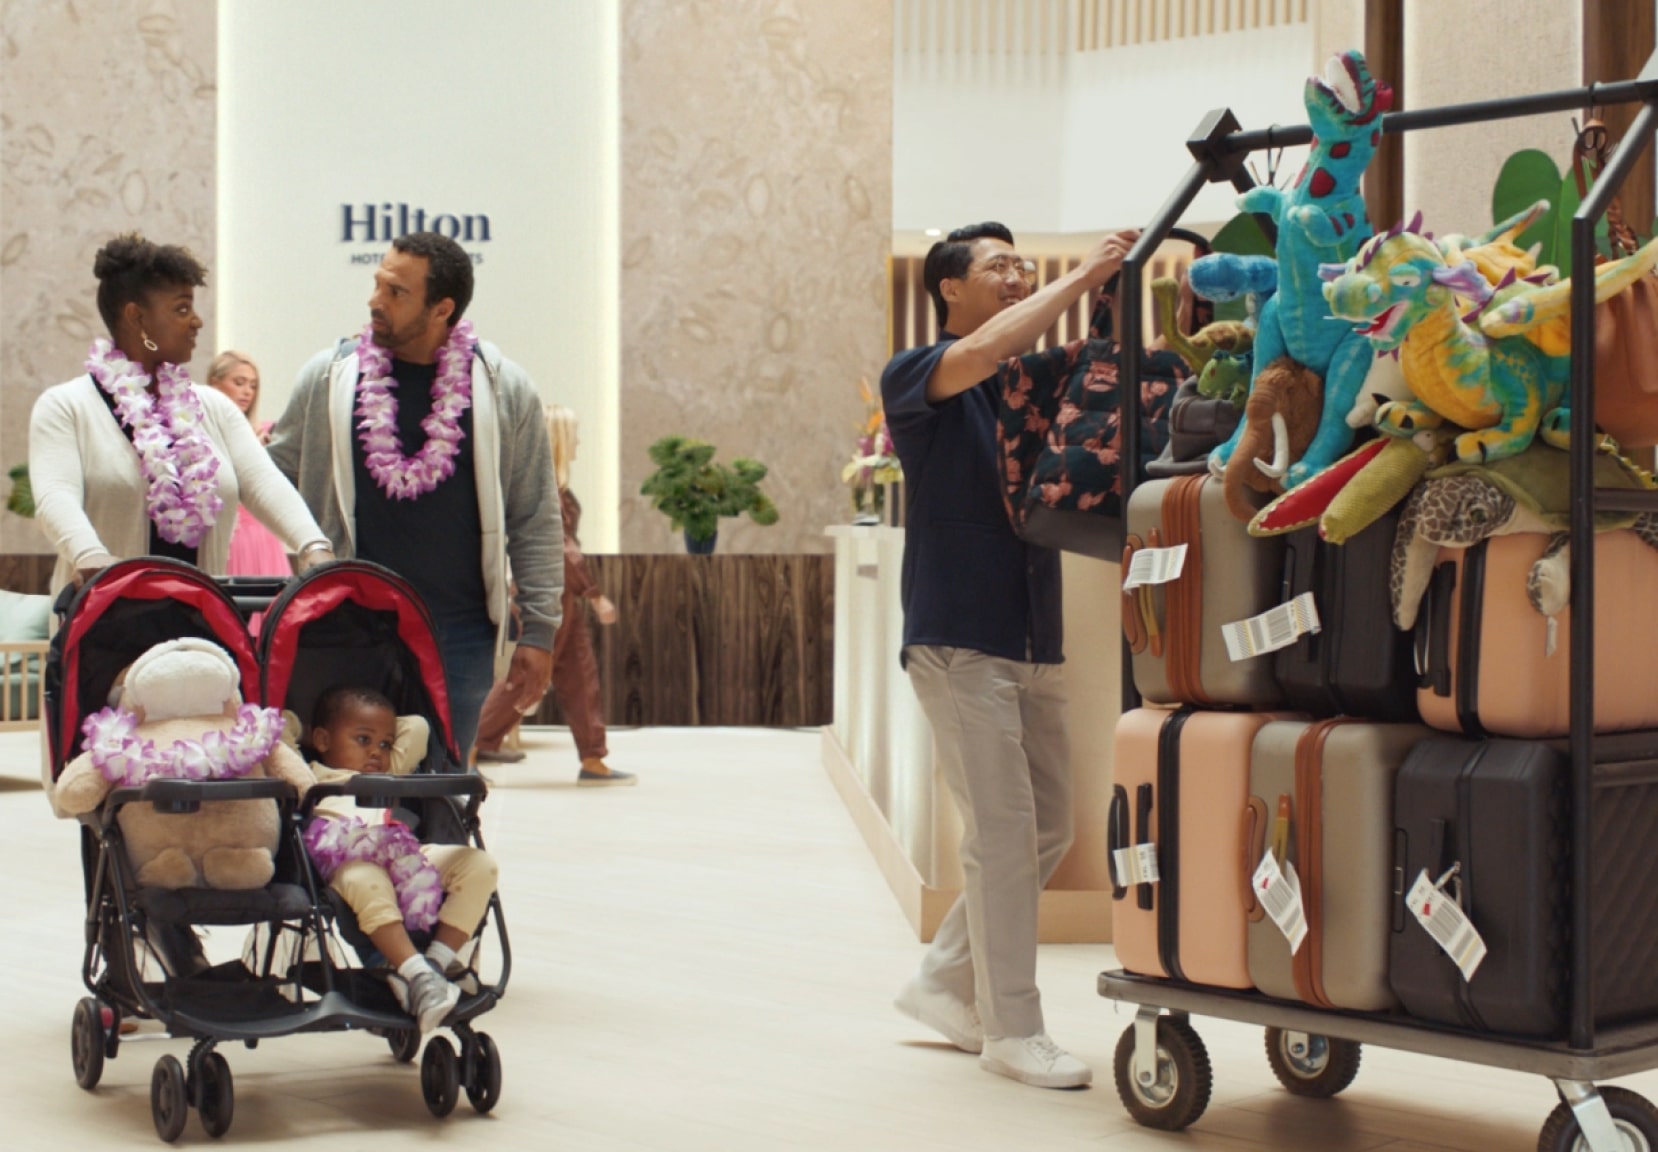 Family checking in to a Hilton Hotel with a stroller.